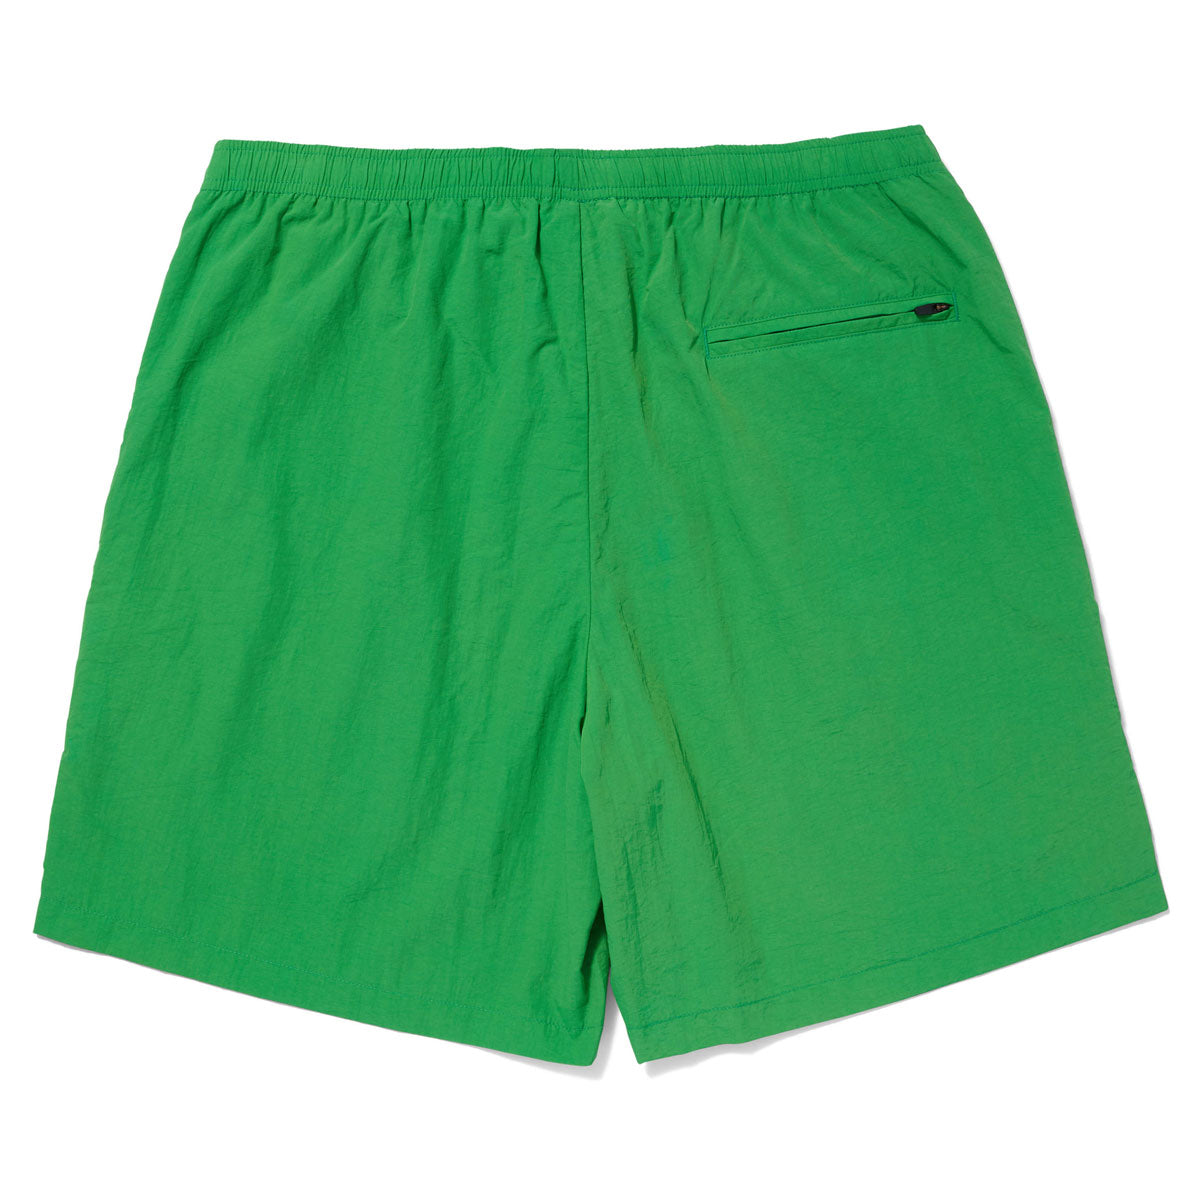 HUF Pacific Easy Shorts - Clover image 2